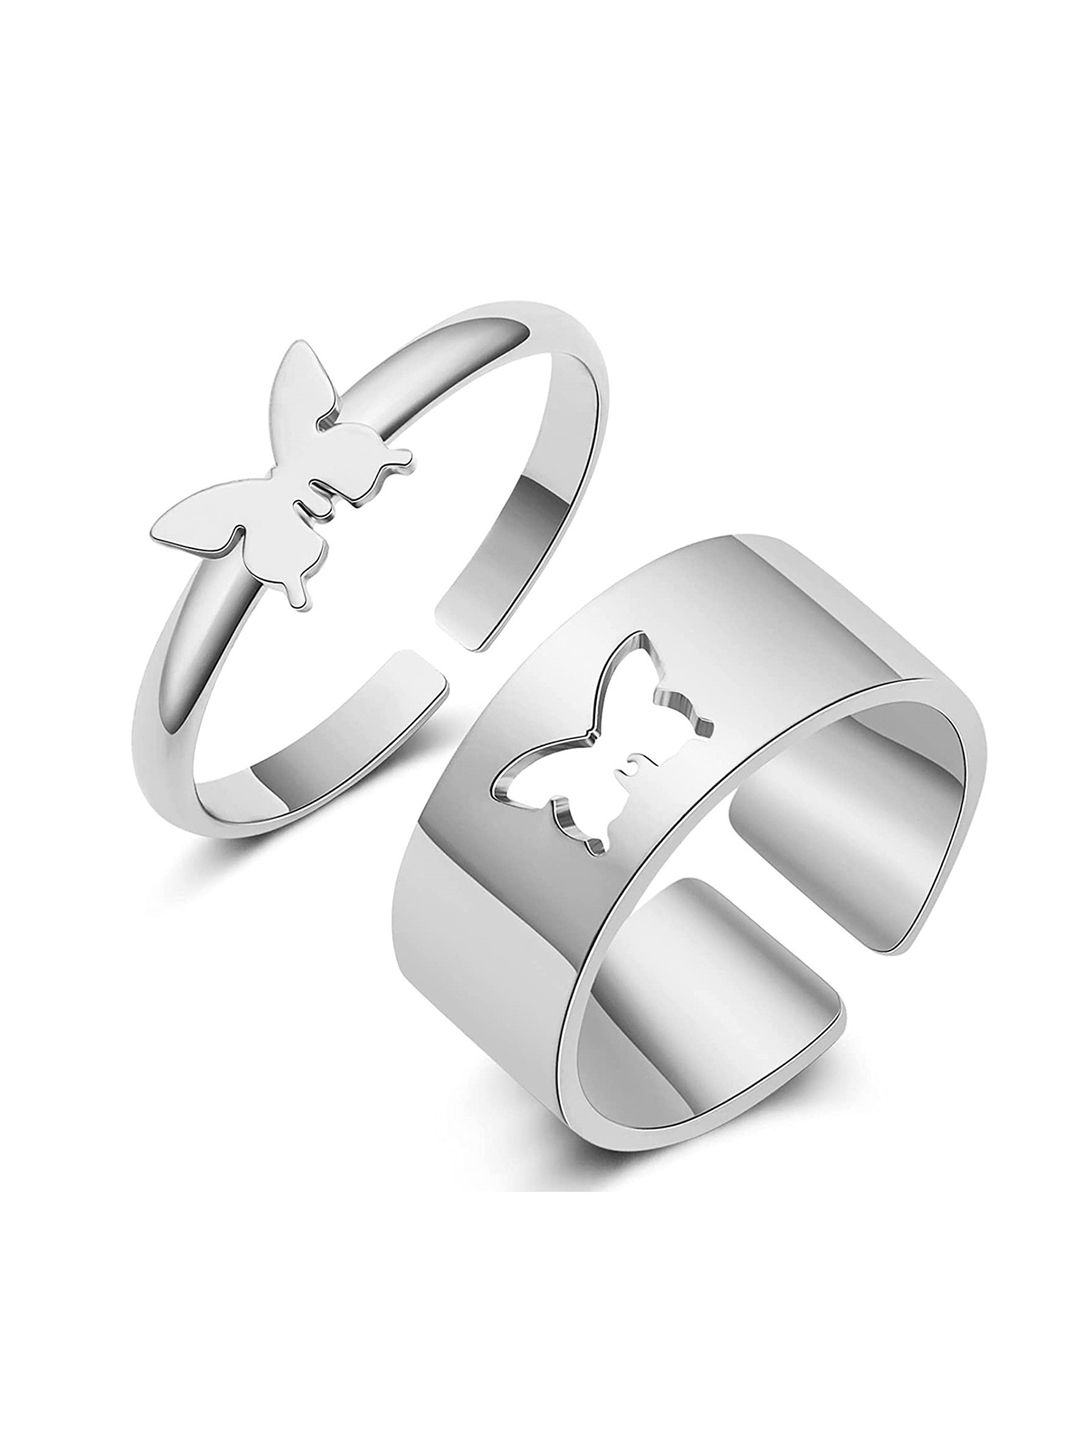 Sarvda Silver-Toned Butterfly Double Ring Price in India